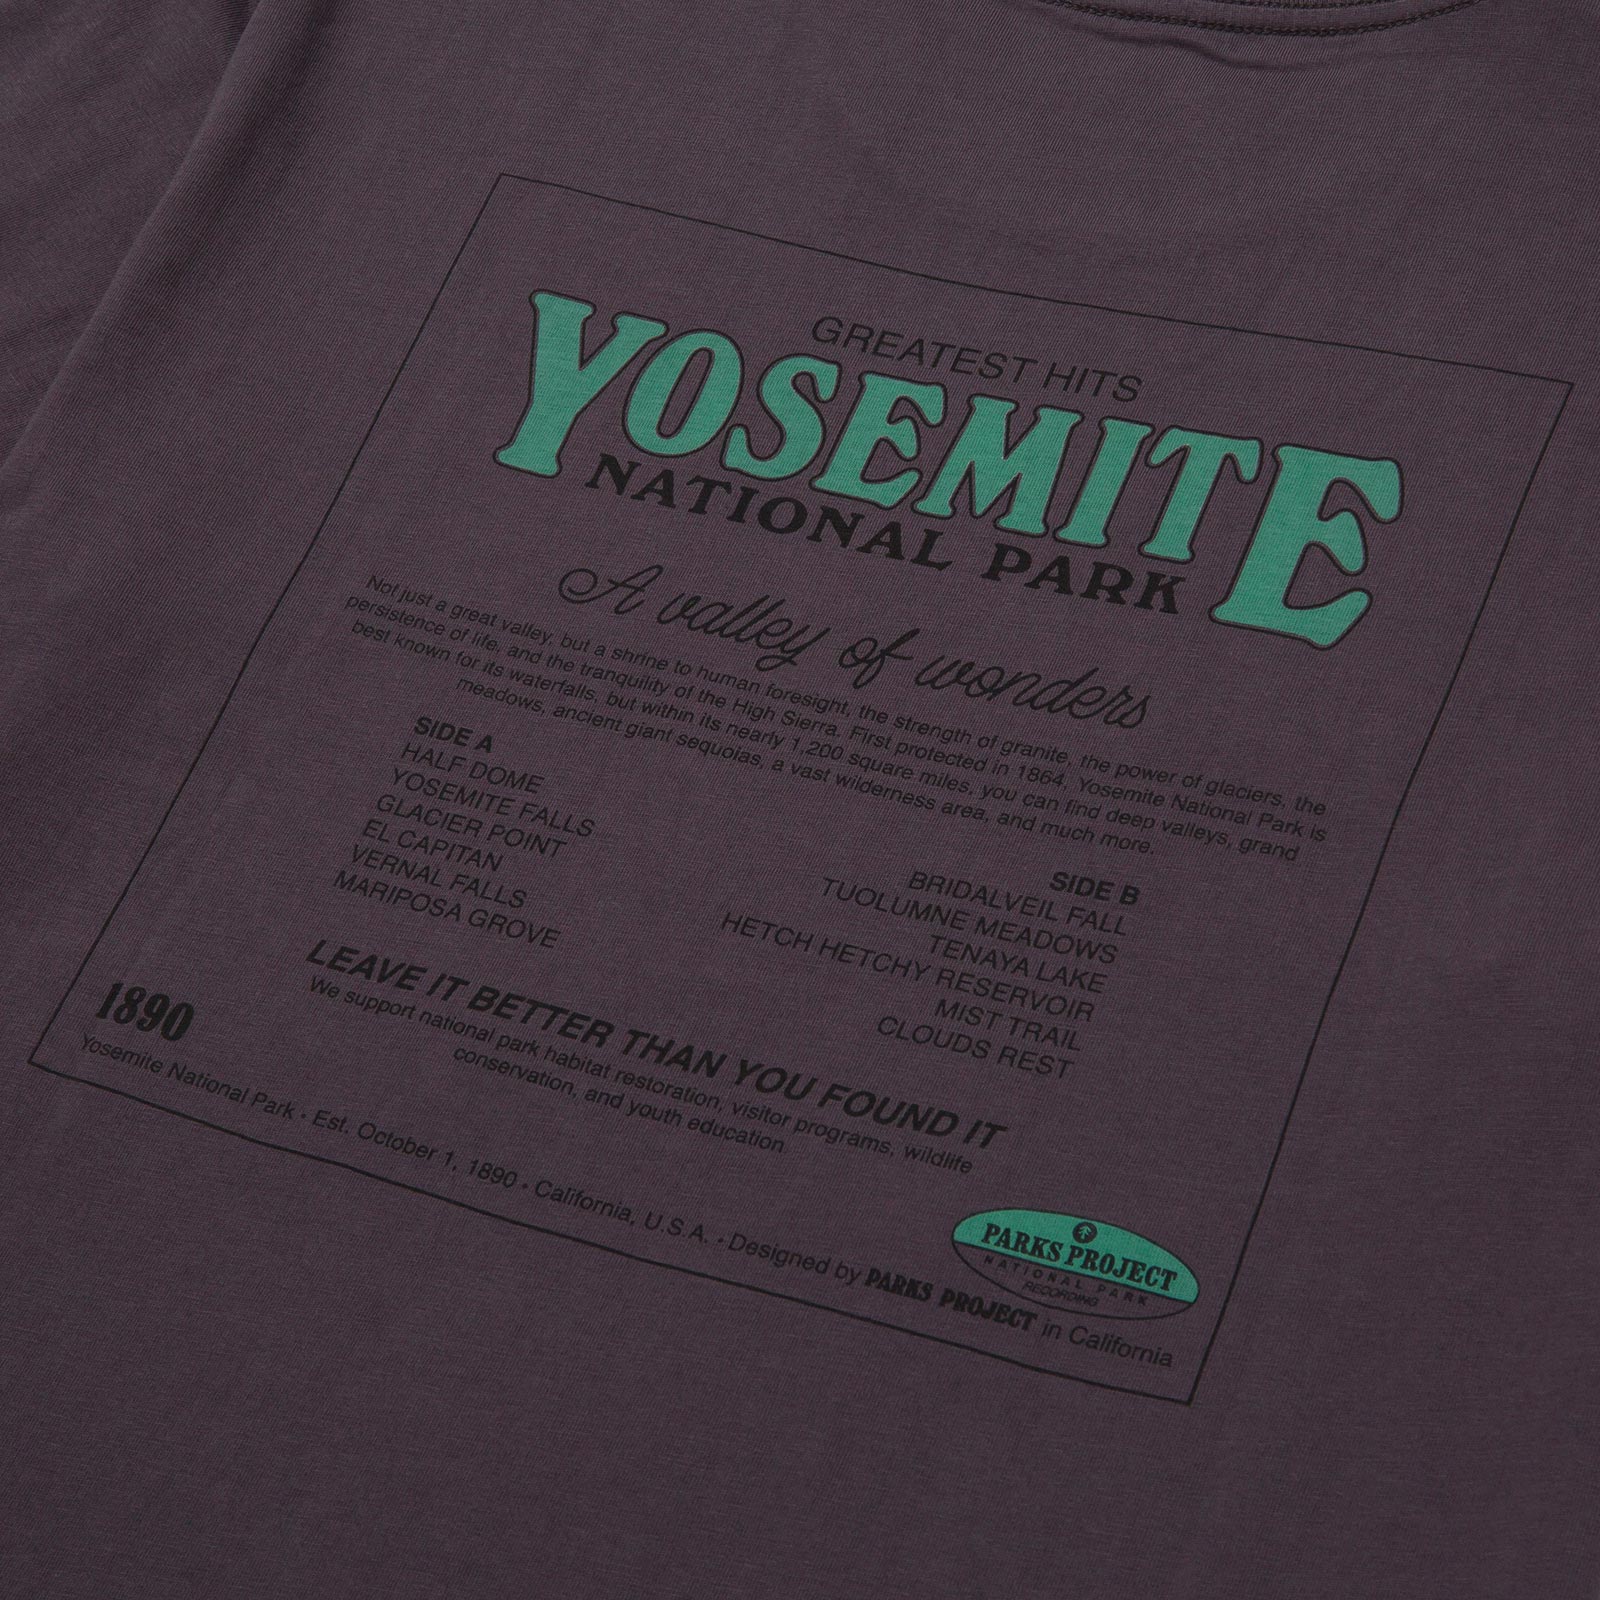 Parks Project Yosemite Cubs Tee